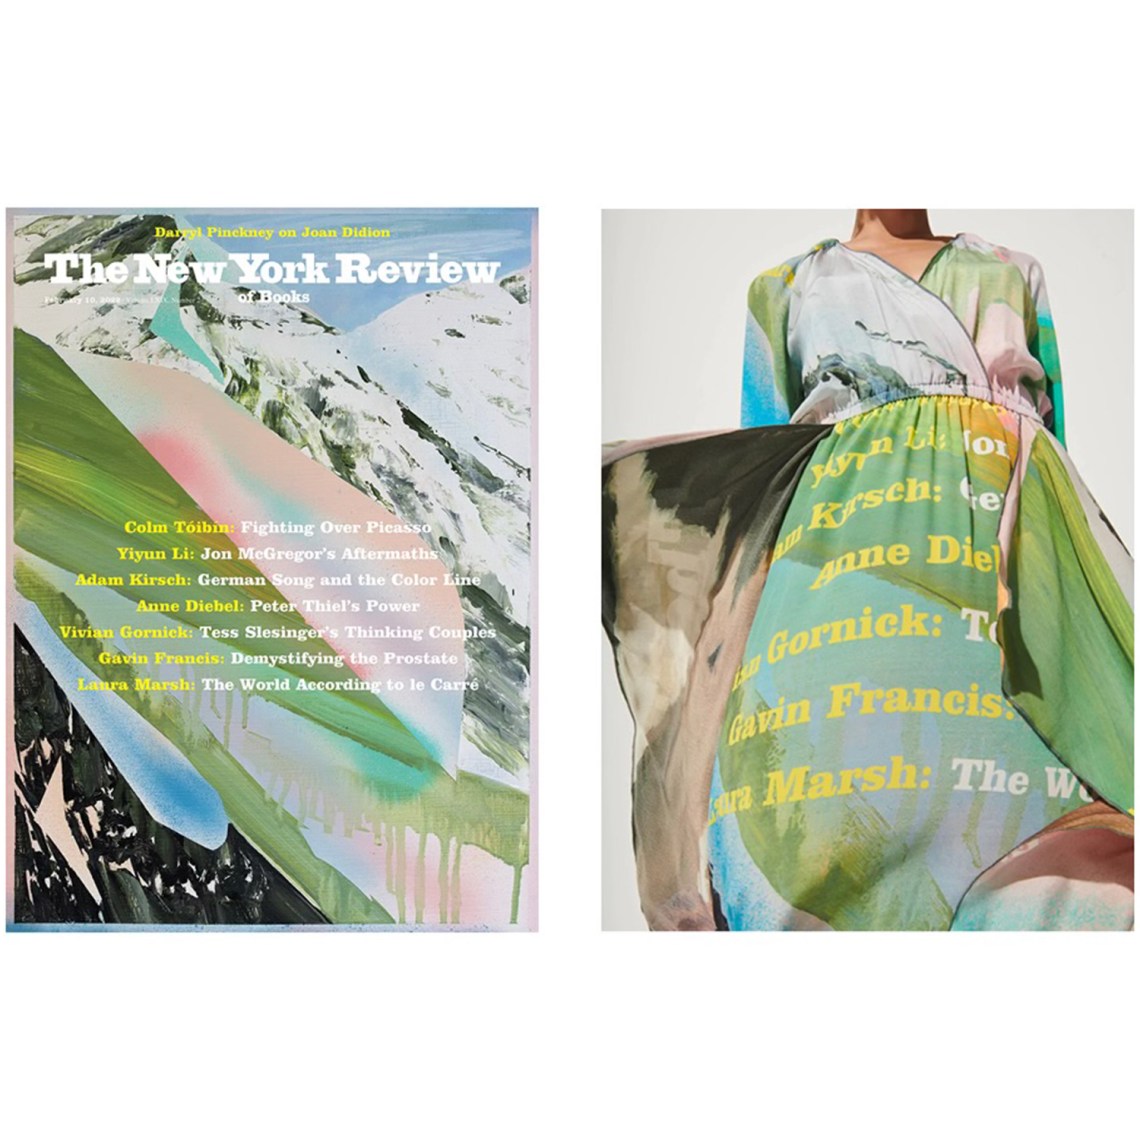 NY Review Cover and Rachel Comey Dress